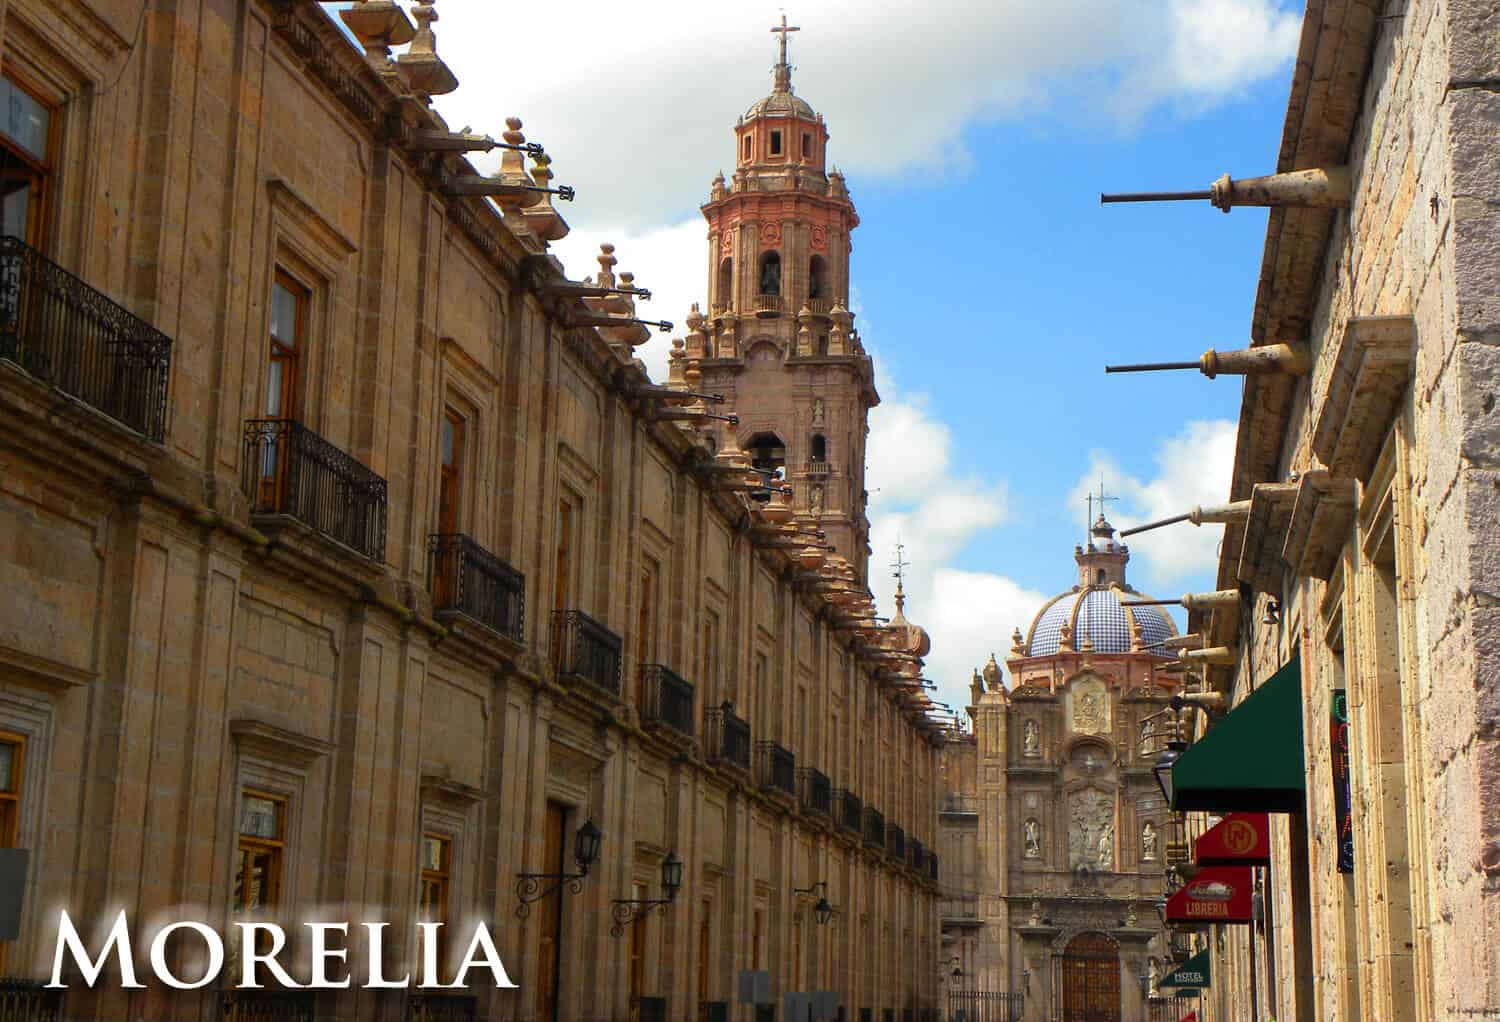 Morelia (Michoacán) and why even UNESCO listed world heritage sites can leave you feeling blah